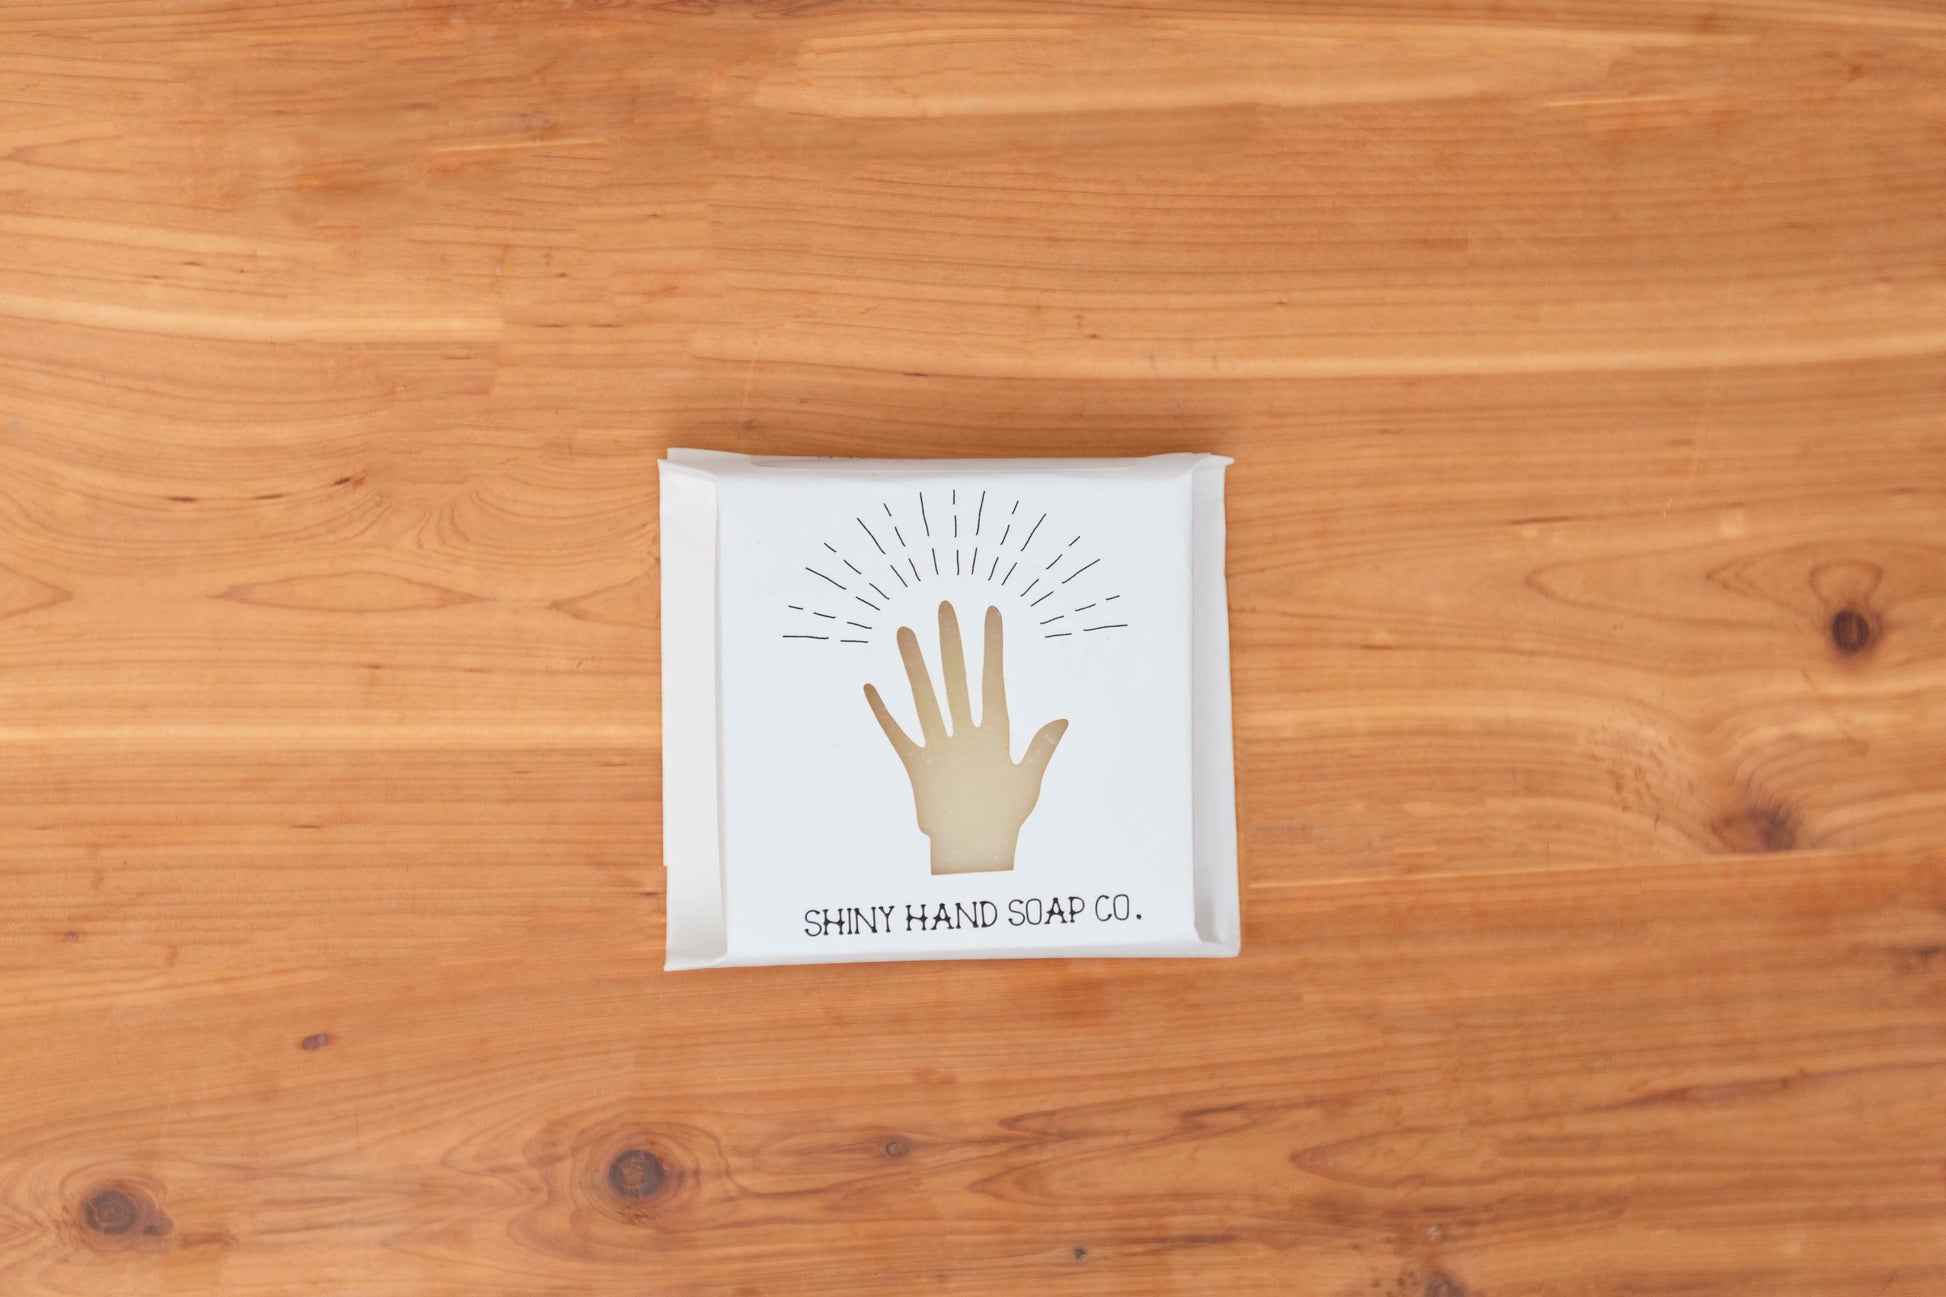 One creamy ivory white bar of Avocado Butter bar soap wrapped in a white recycled paper with a hand cutout shape against a wooden cedar background.